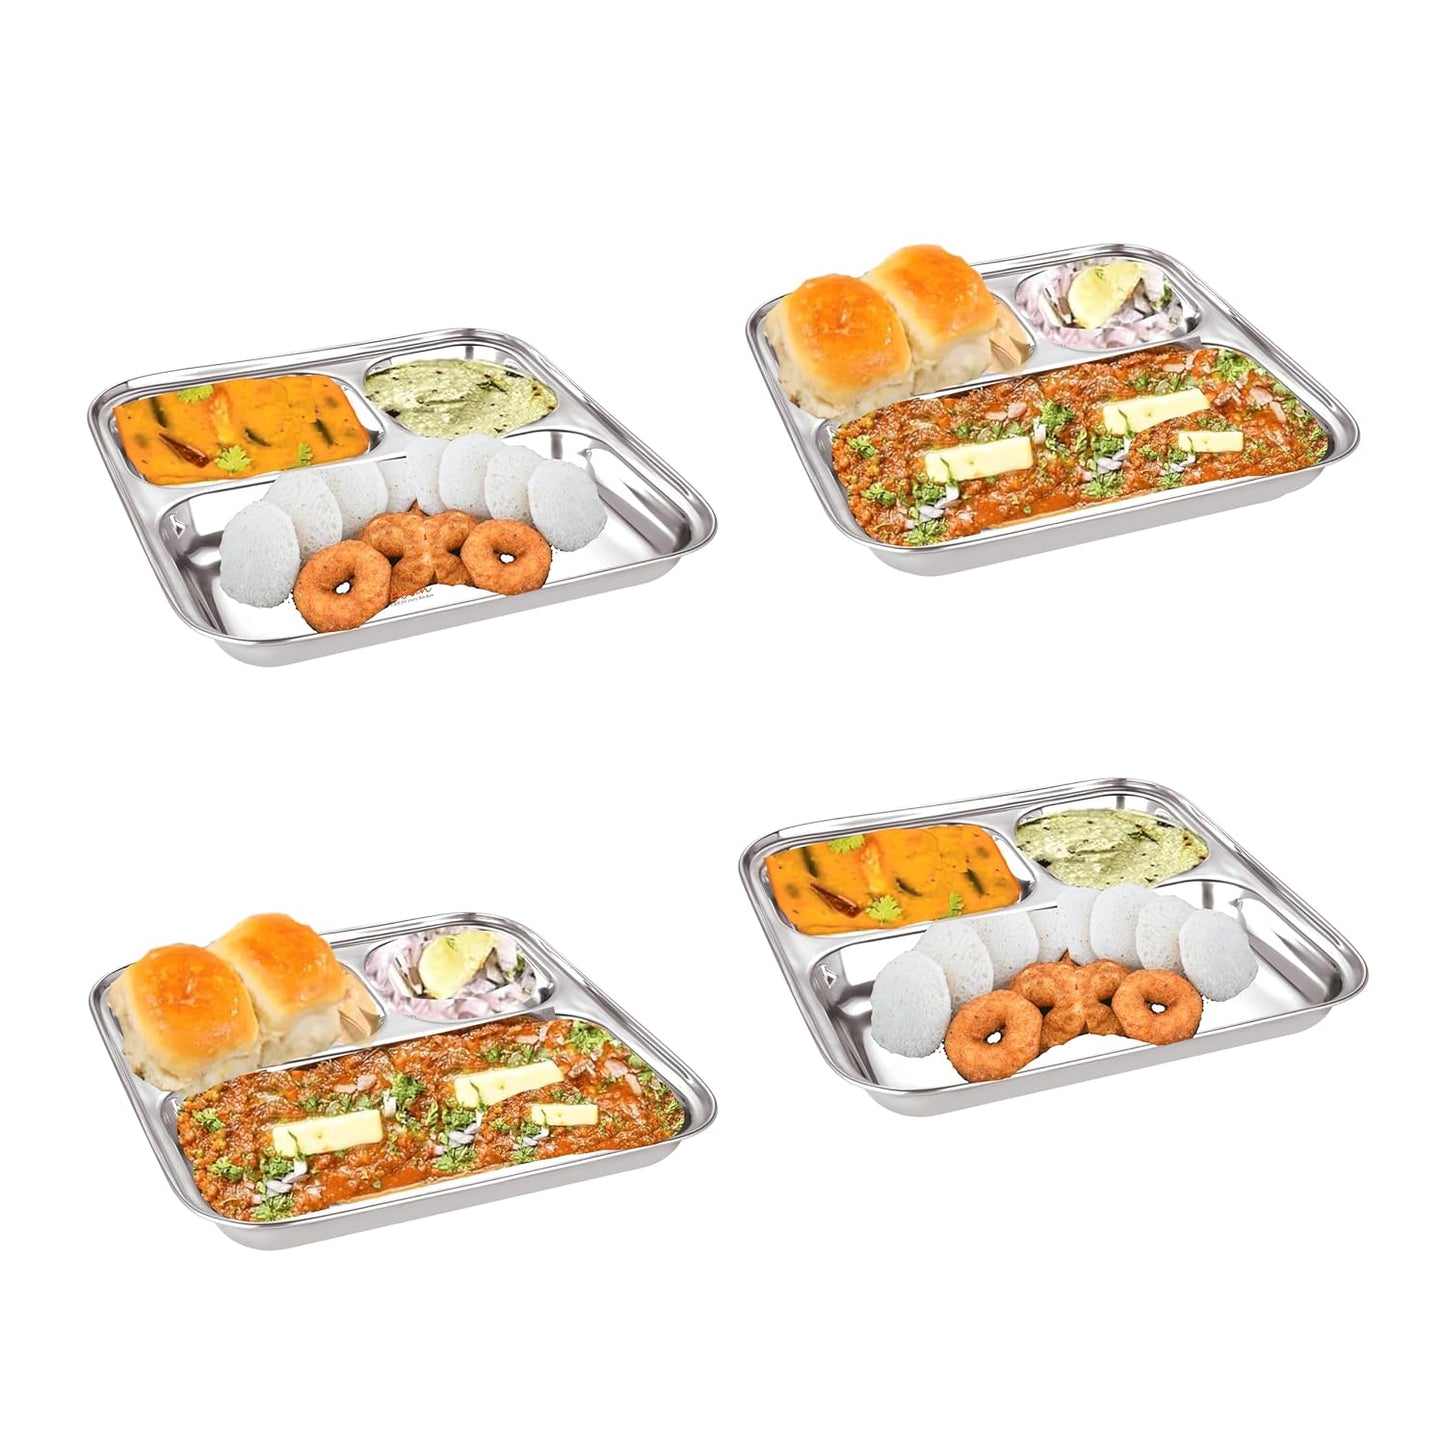 steel plates with compartments | steel plates set of 12 | stainless steel plates set of 6 | stainless steel plate | steel plates set of 4 | steel plates for kids | lunch plates stainless steel | steel plates set of 2 | stainless steel plates | steel plate set | steel plates set of 6 dinner plate | steel thali with compartments